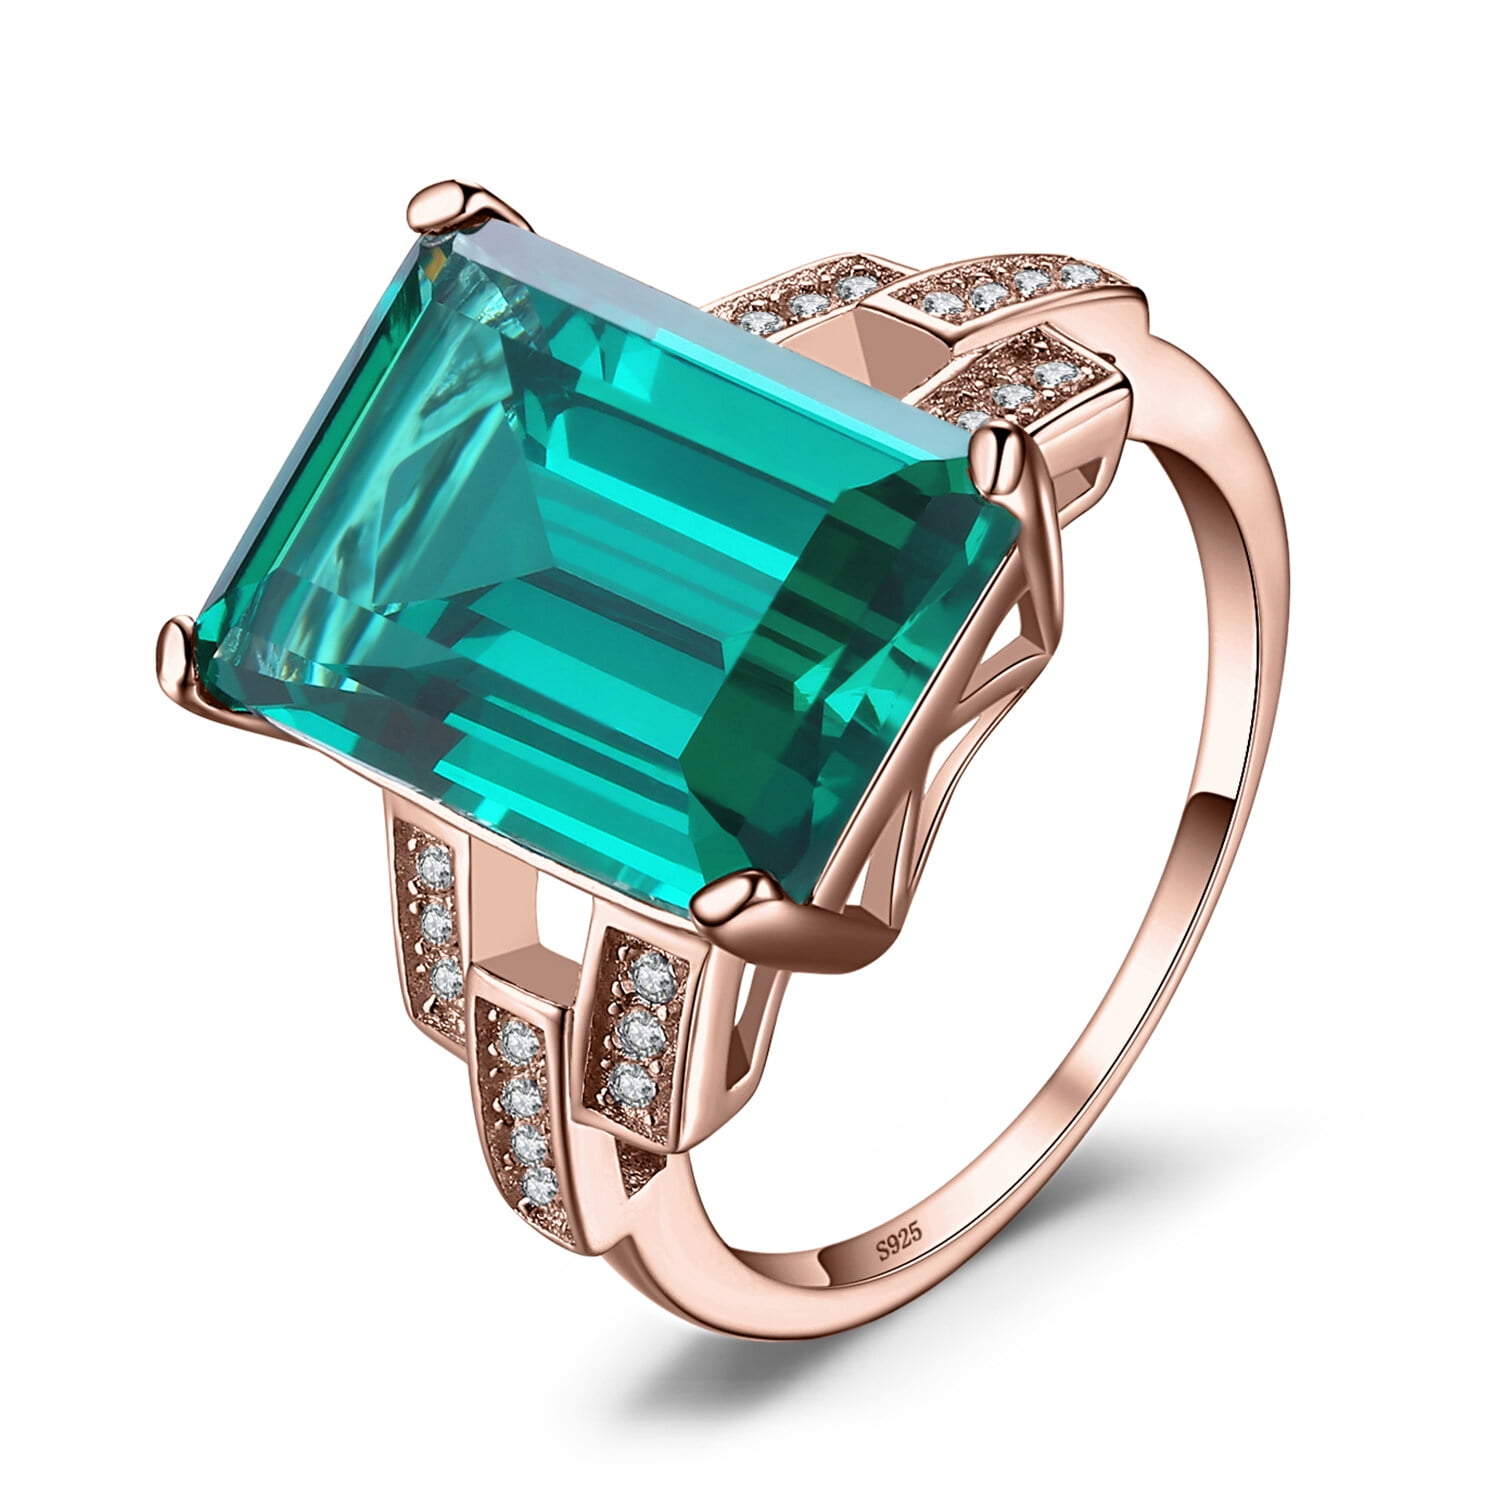 Rendezvous Lab Emerald and Diamond Cocktail Ring